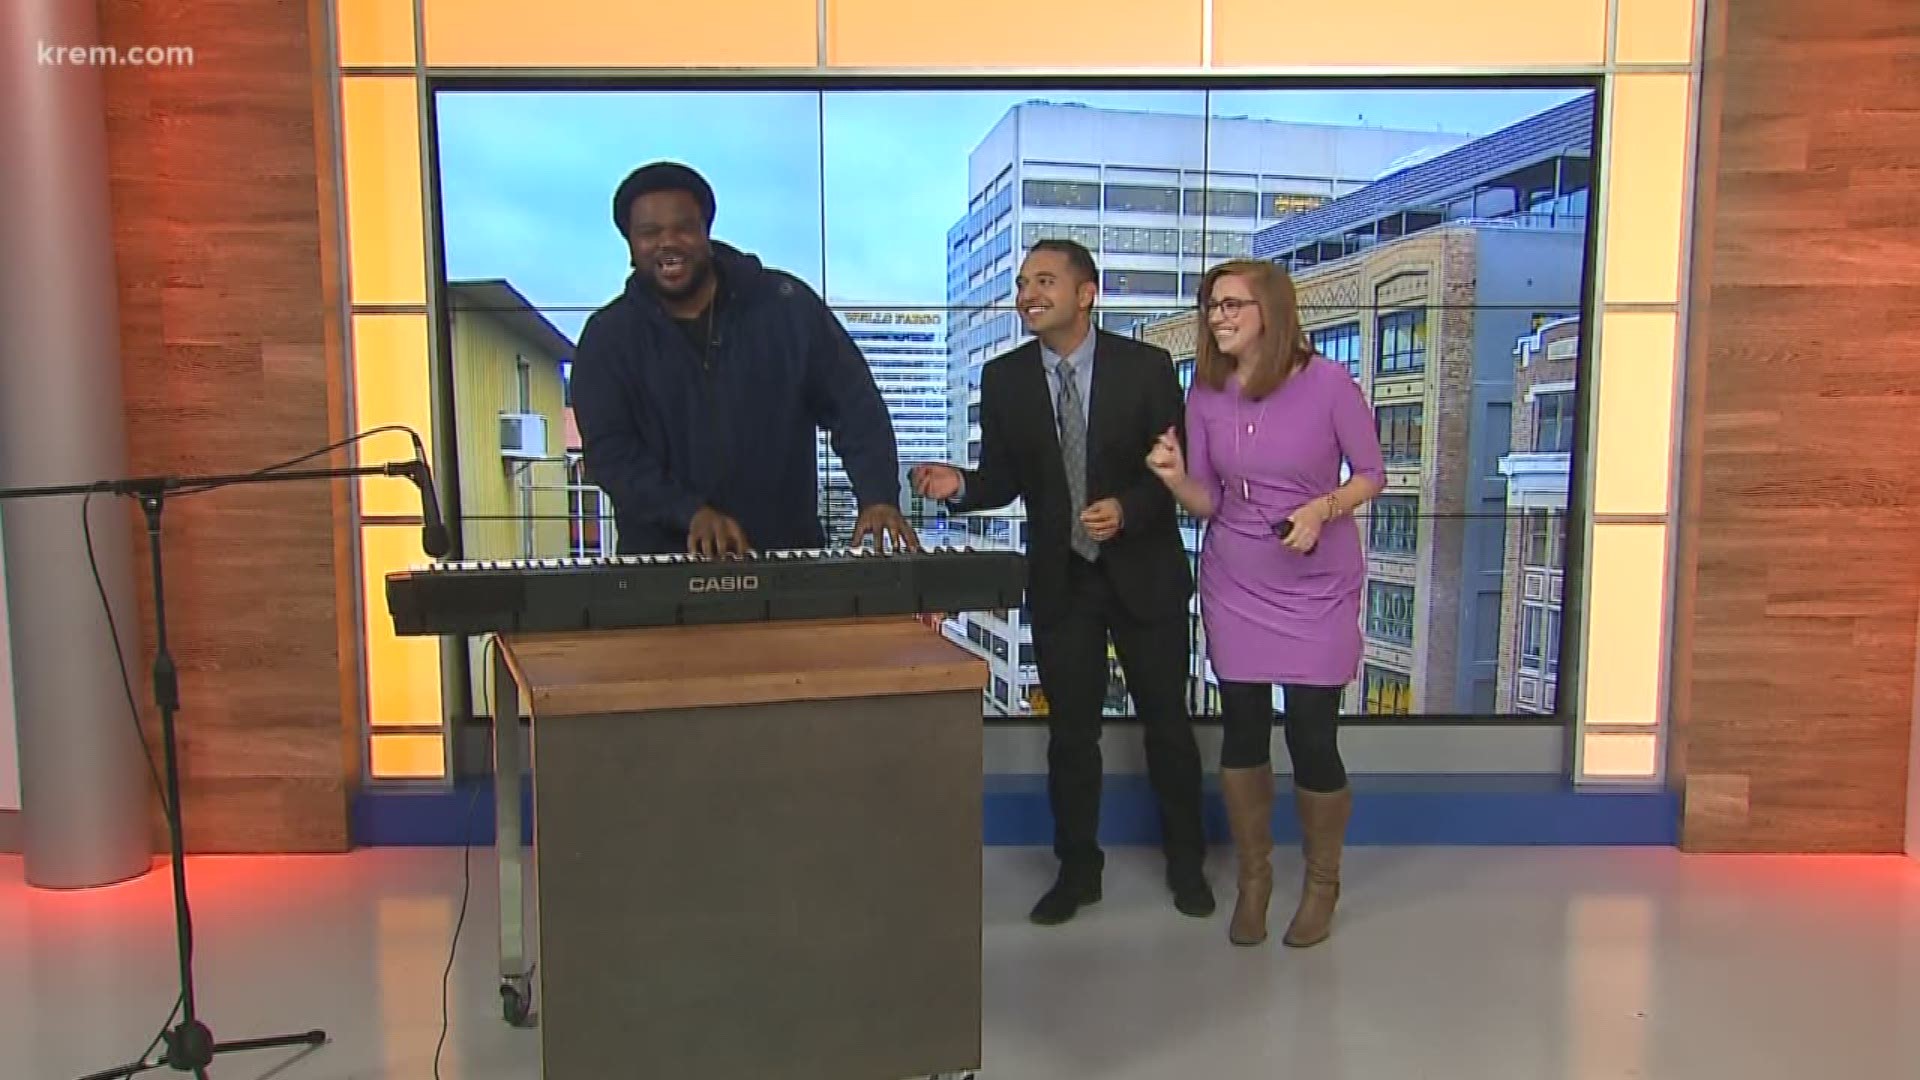 Craig Robinson stopped by the studio ahead of headlining the Spokane comedy club this weekend. Robinson banged out some tunes and serenaded KREM's Evan Noorani.